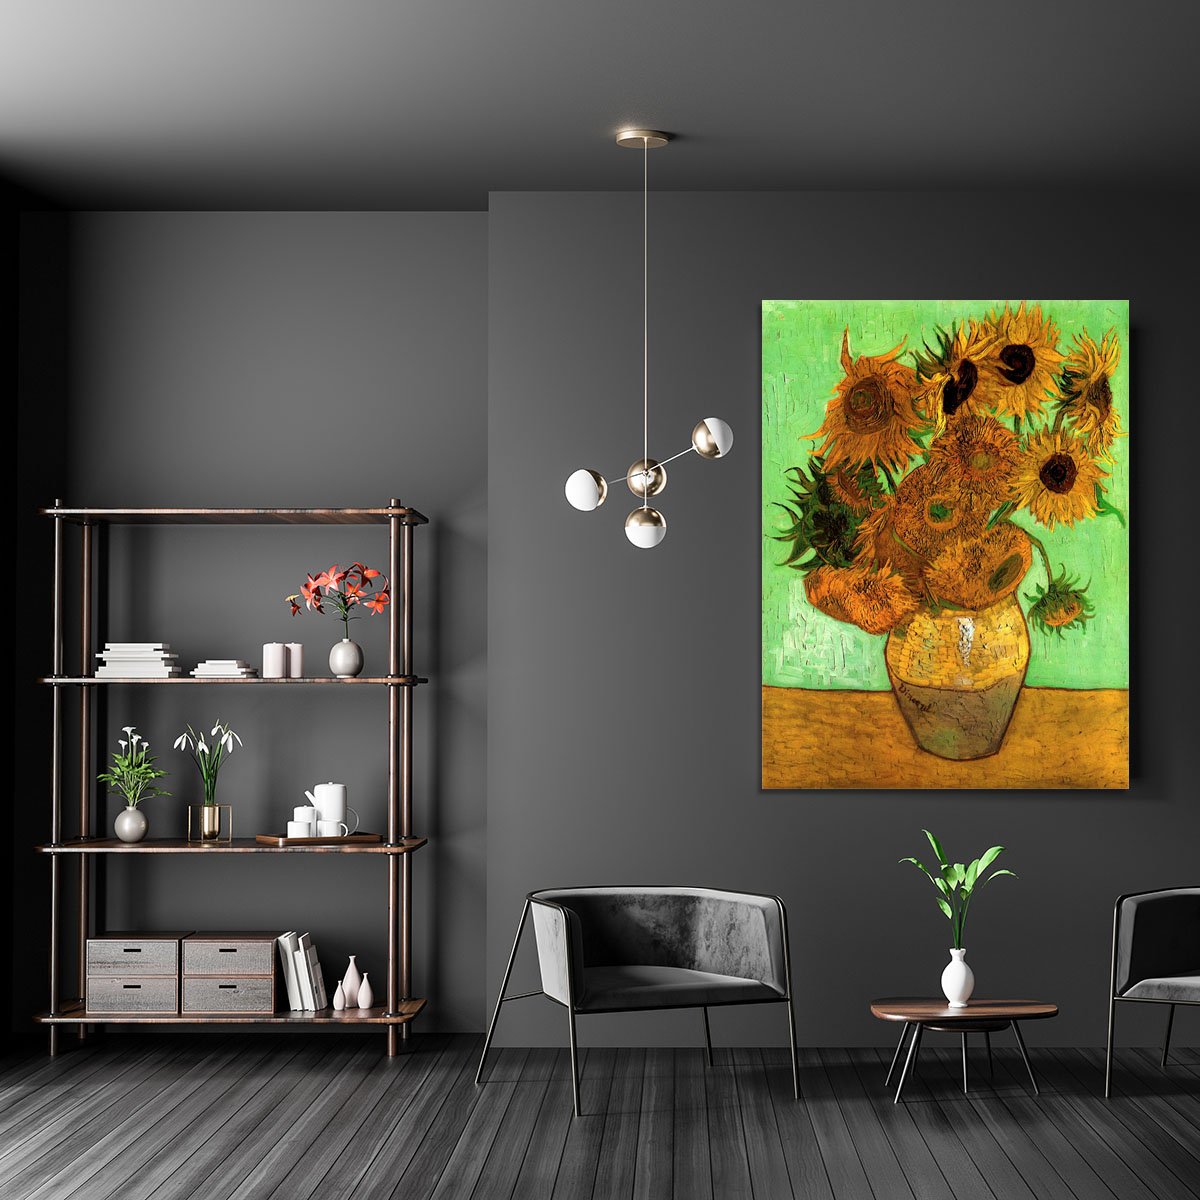 Still Life Vase with Twelve Sunflowers 2 by Van Gogh Canvas Print or Poster